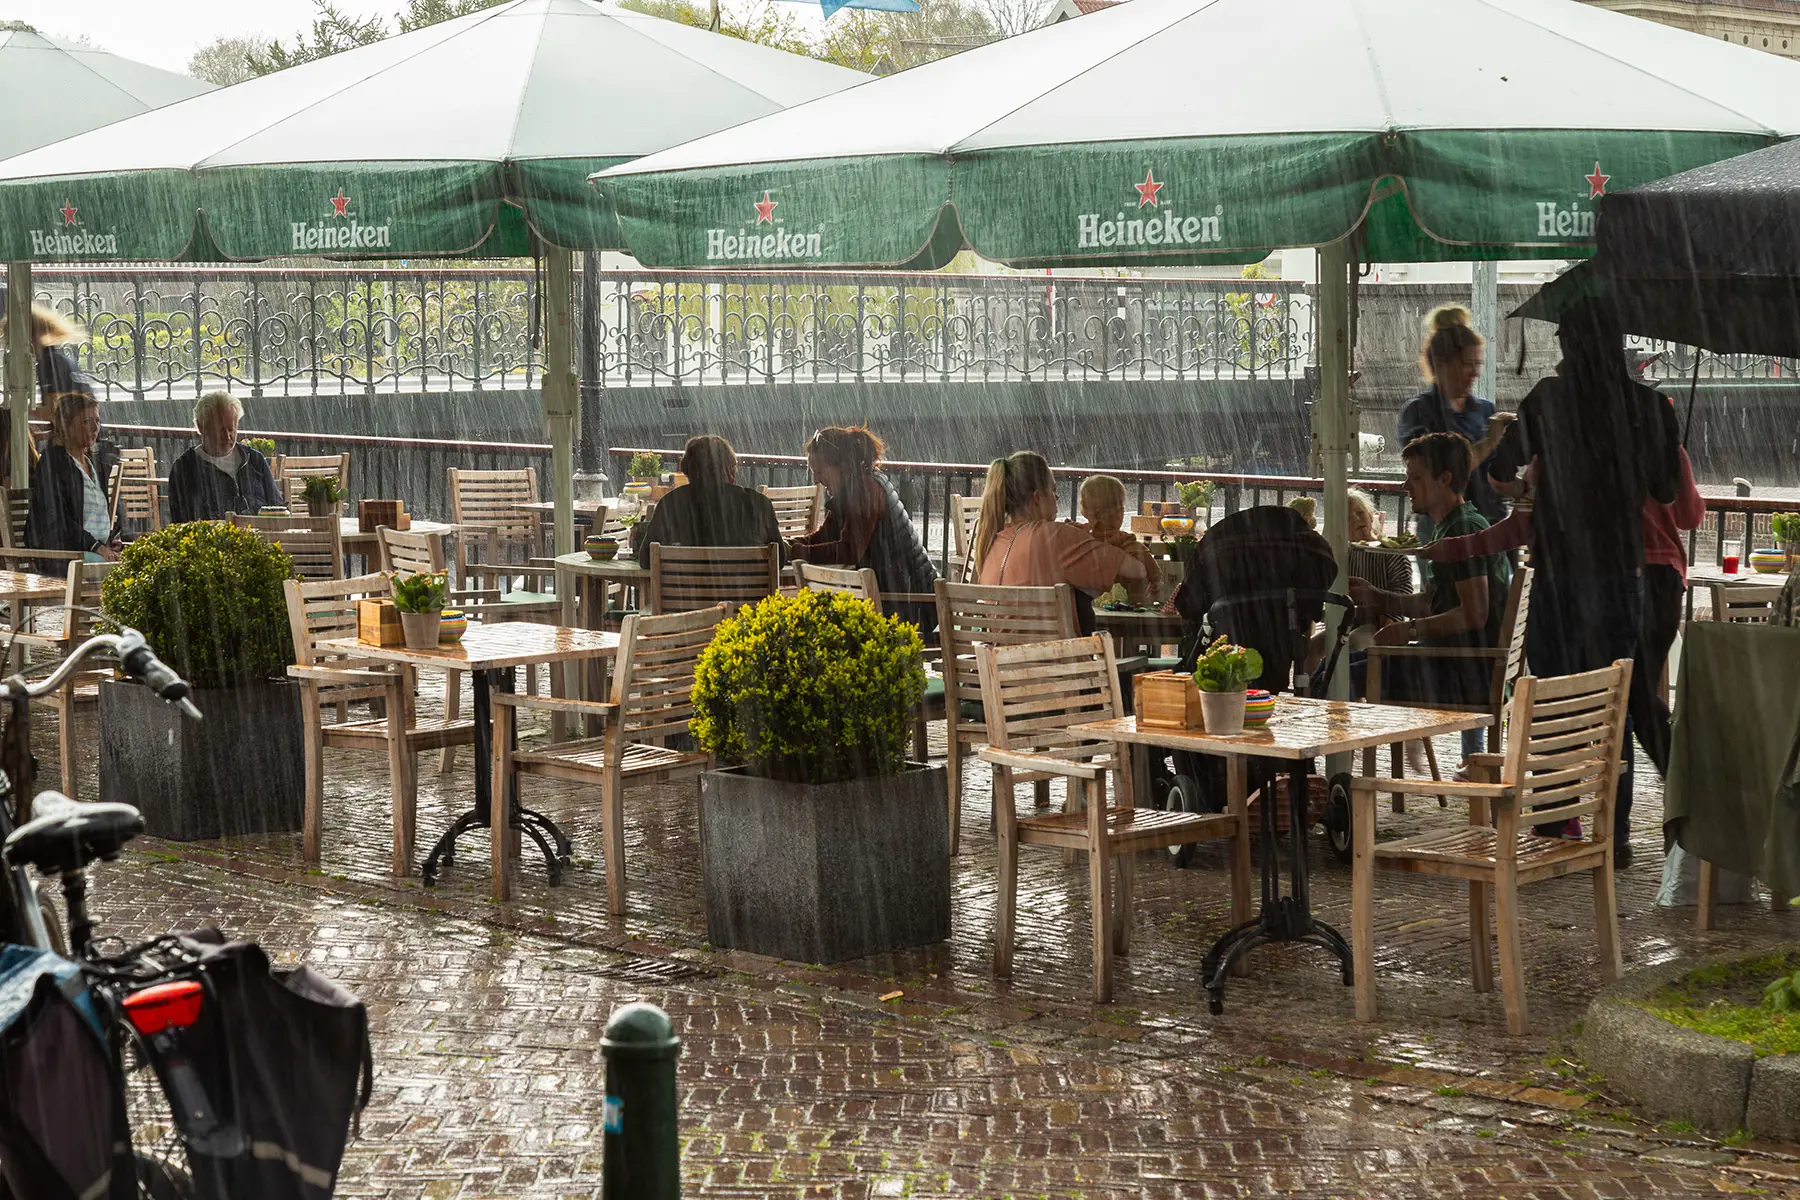 Rain on a terrace in the Netherlands